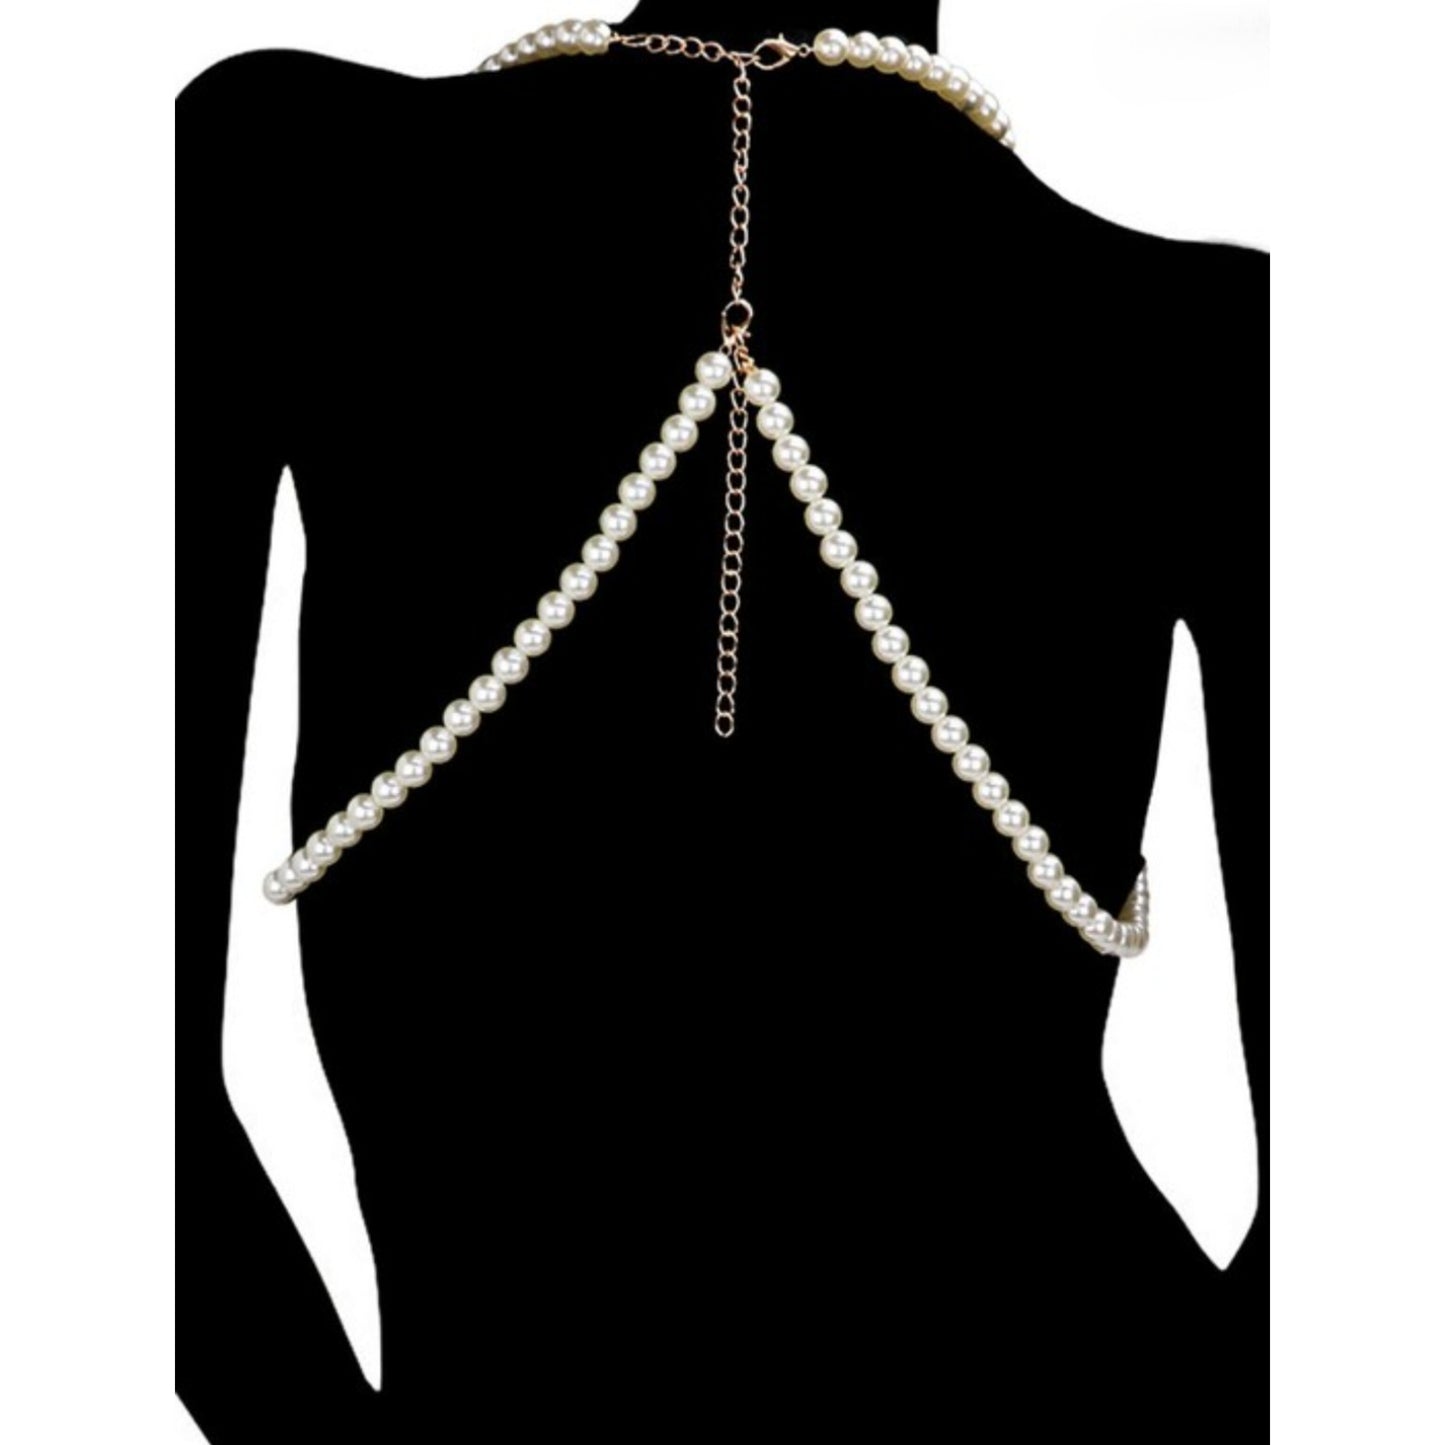 Draped with Class Body Chain